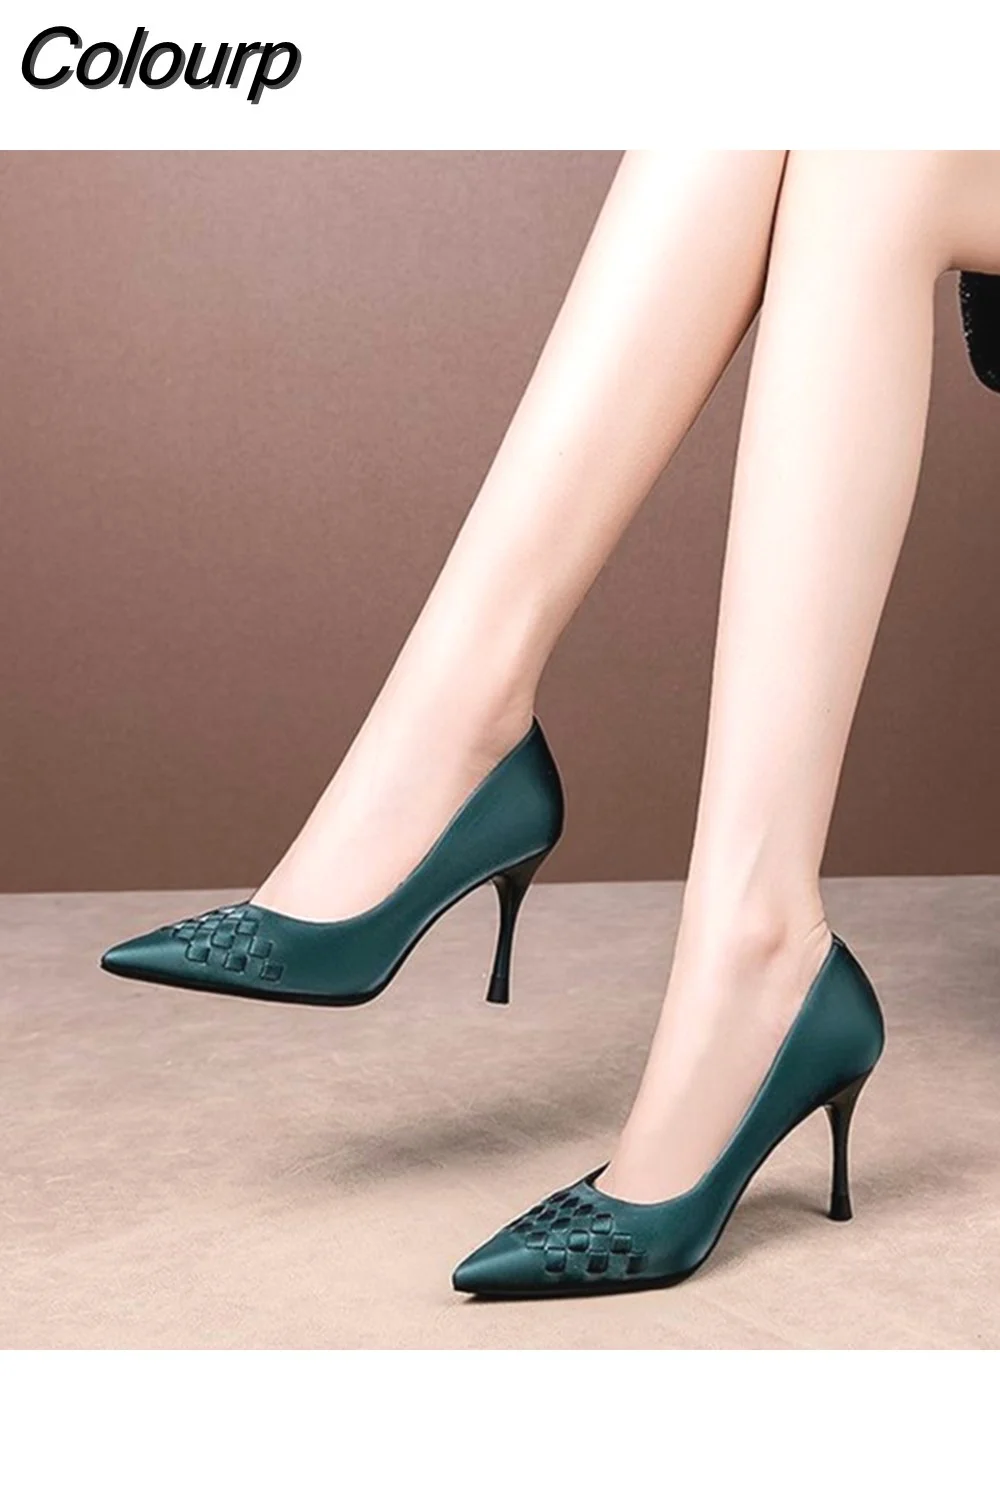 Colourp Satin Silk Weave Women Pumps Green Pointed Toe Stiletto High Heels Temperament Single Shoes Elegant Lady Party Dress Shoes